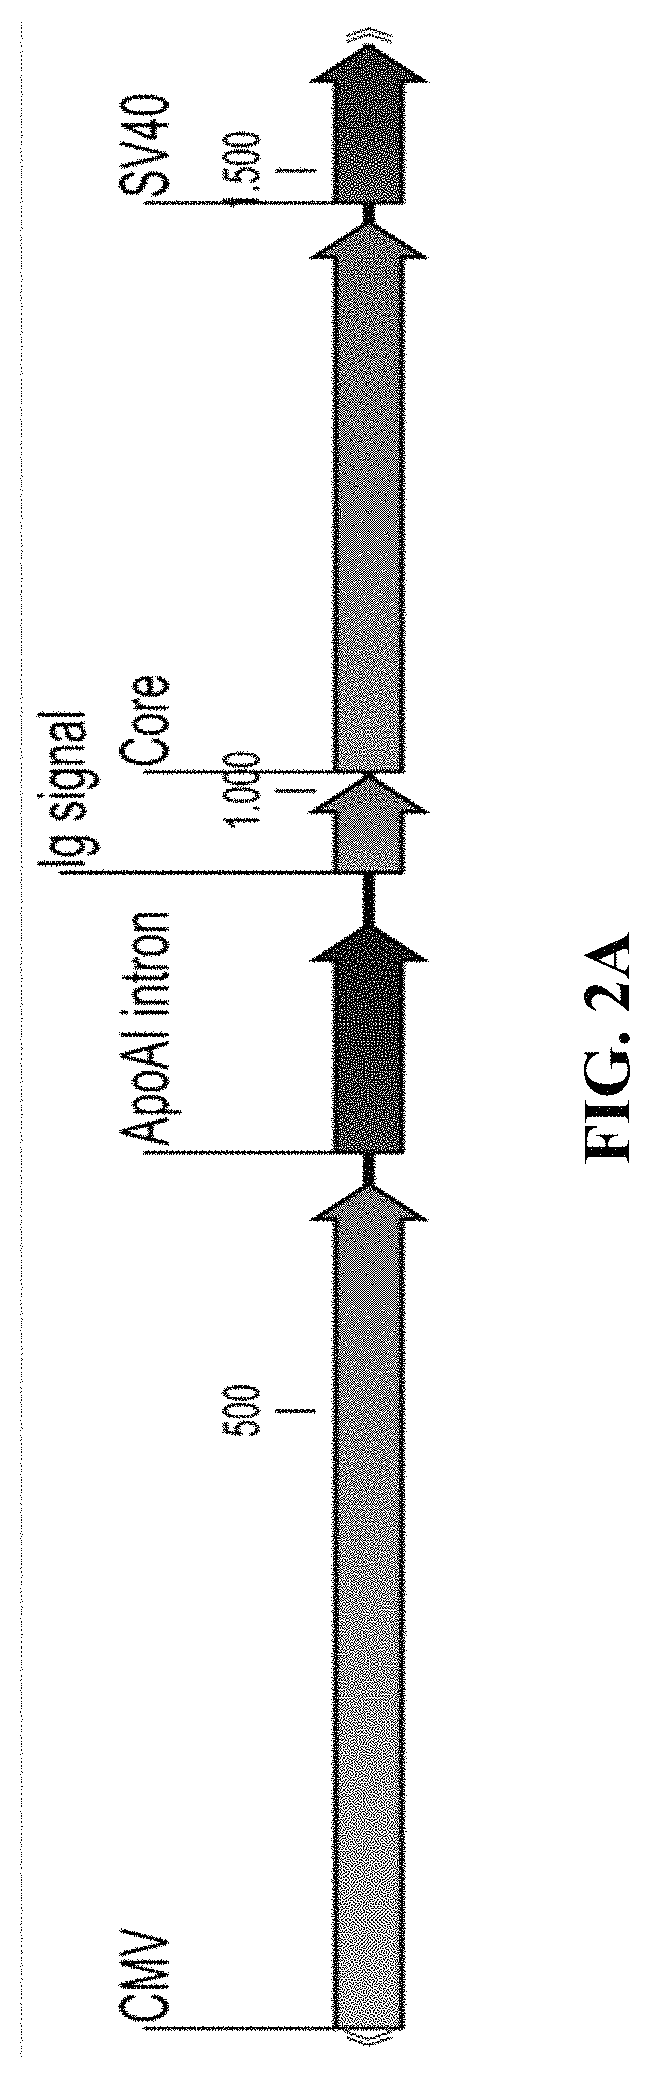 Methods and compositions for inducing an immune response against Hepatitis B Virus (HBV)